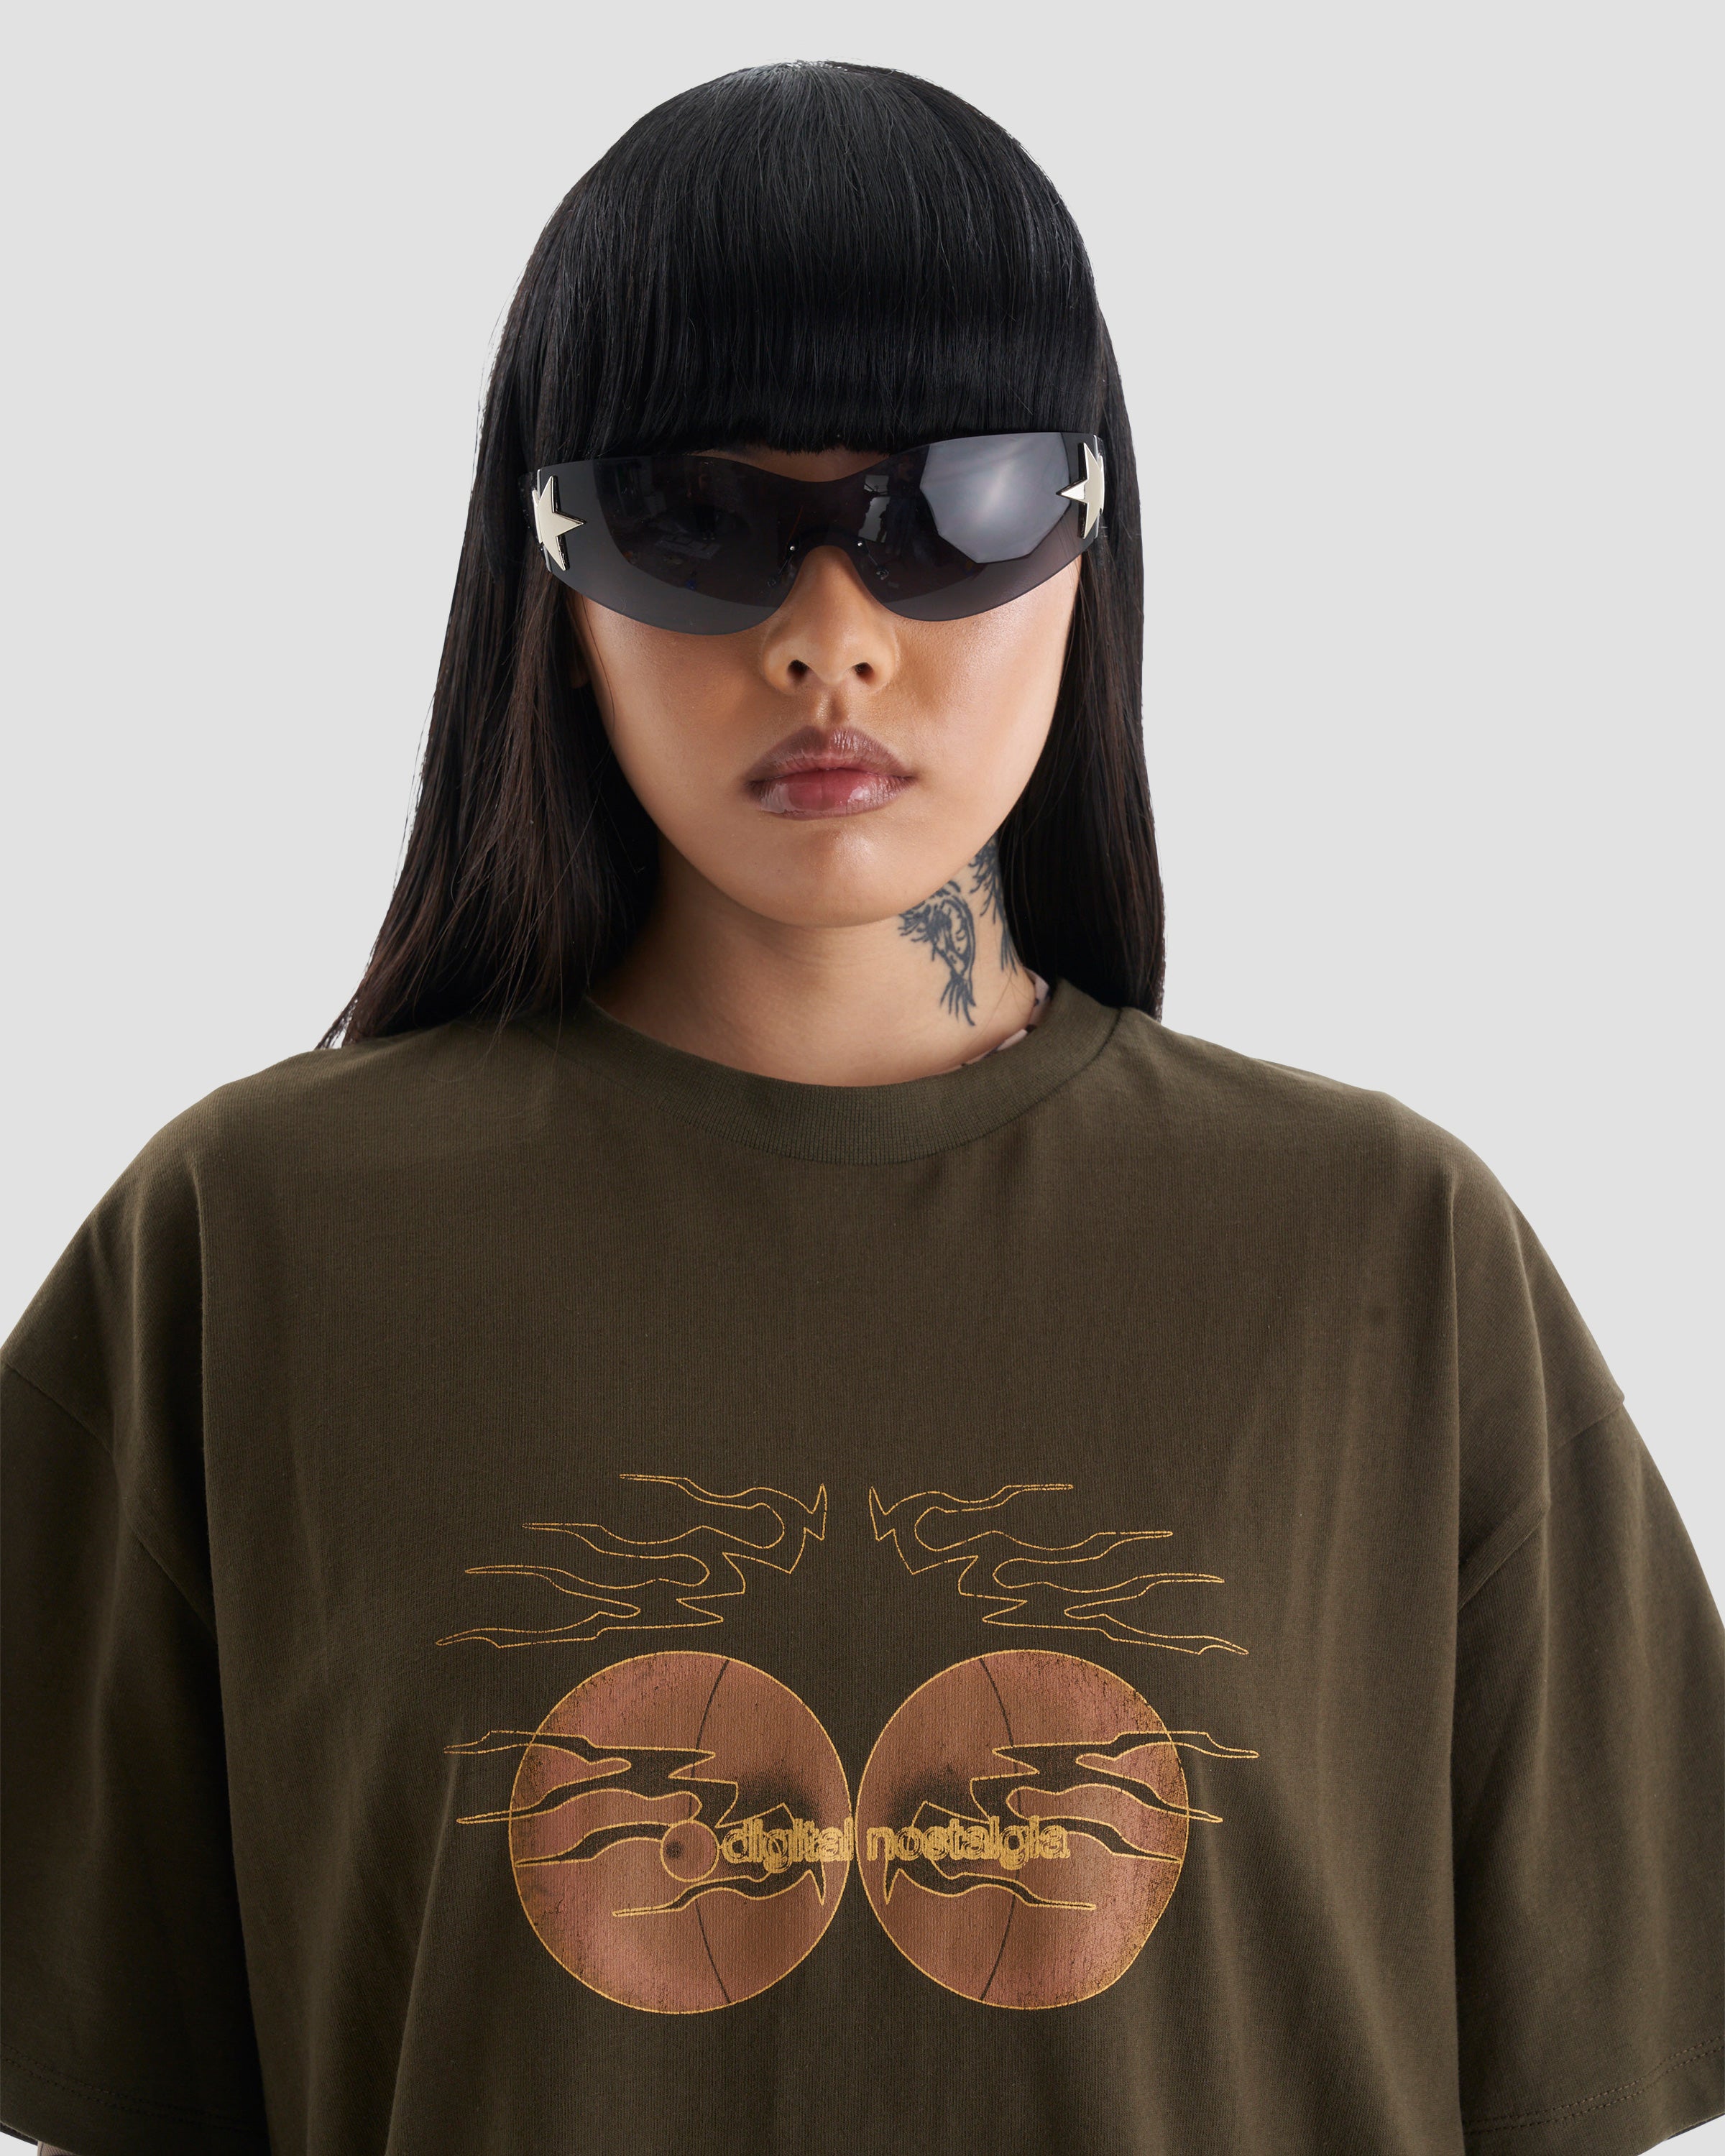 Nostalgia Graphic Oversized T-Shirt in Brown